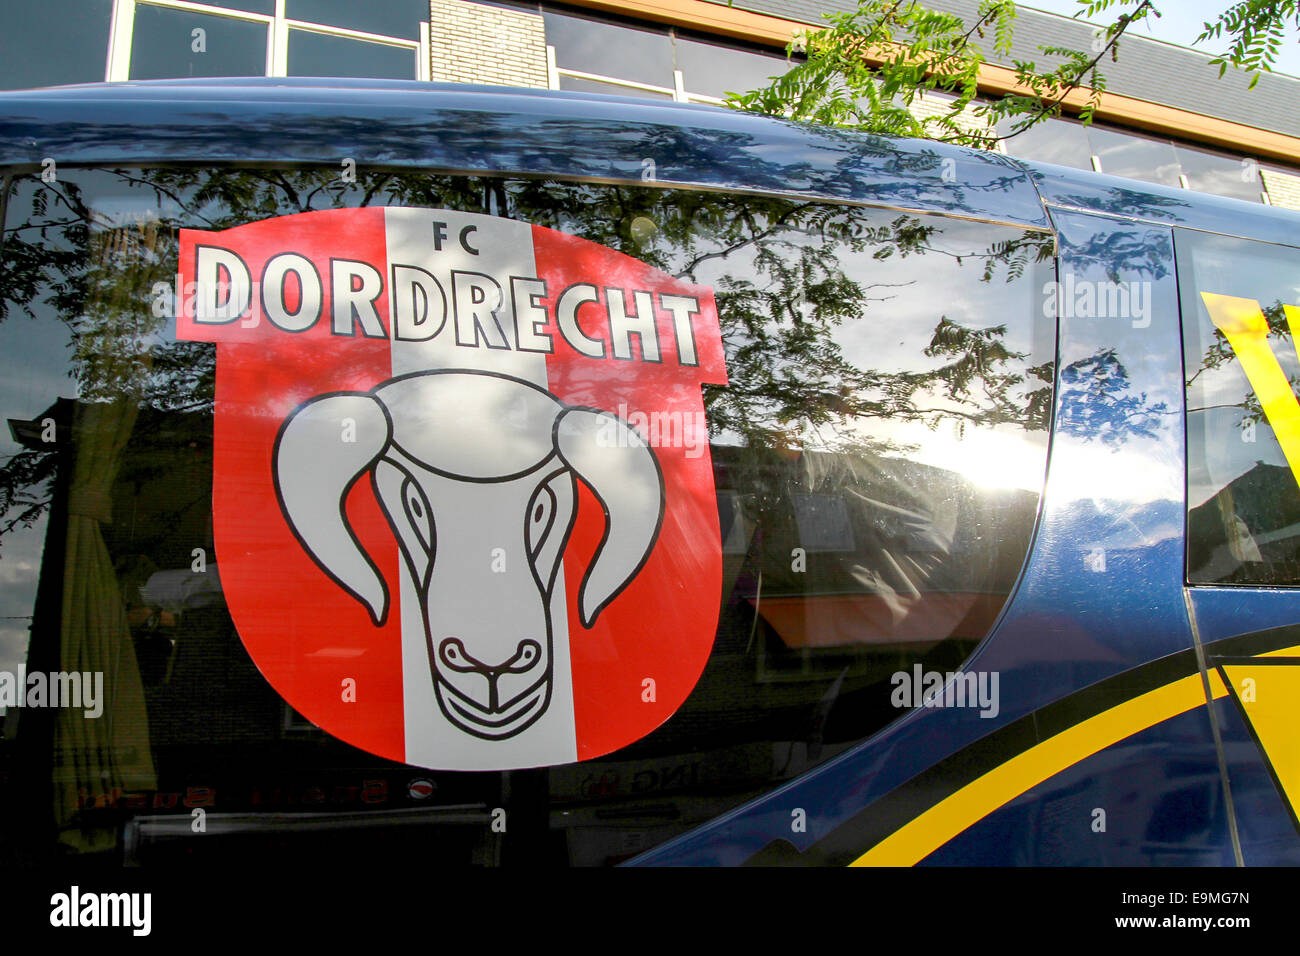 DORDRECHT, NETHERLANDS - MAY 20 2014: FC Dordrecht soccer players arriving in the players bus as fans cheer on to celebrate Stock Photo